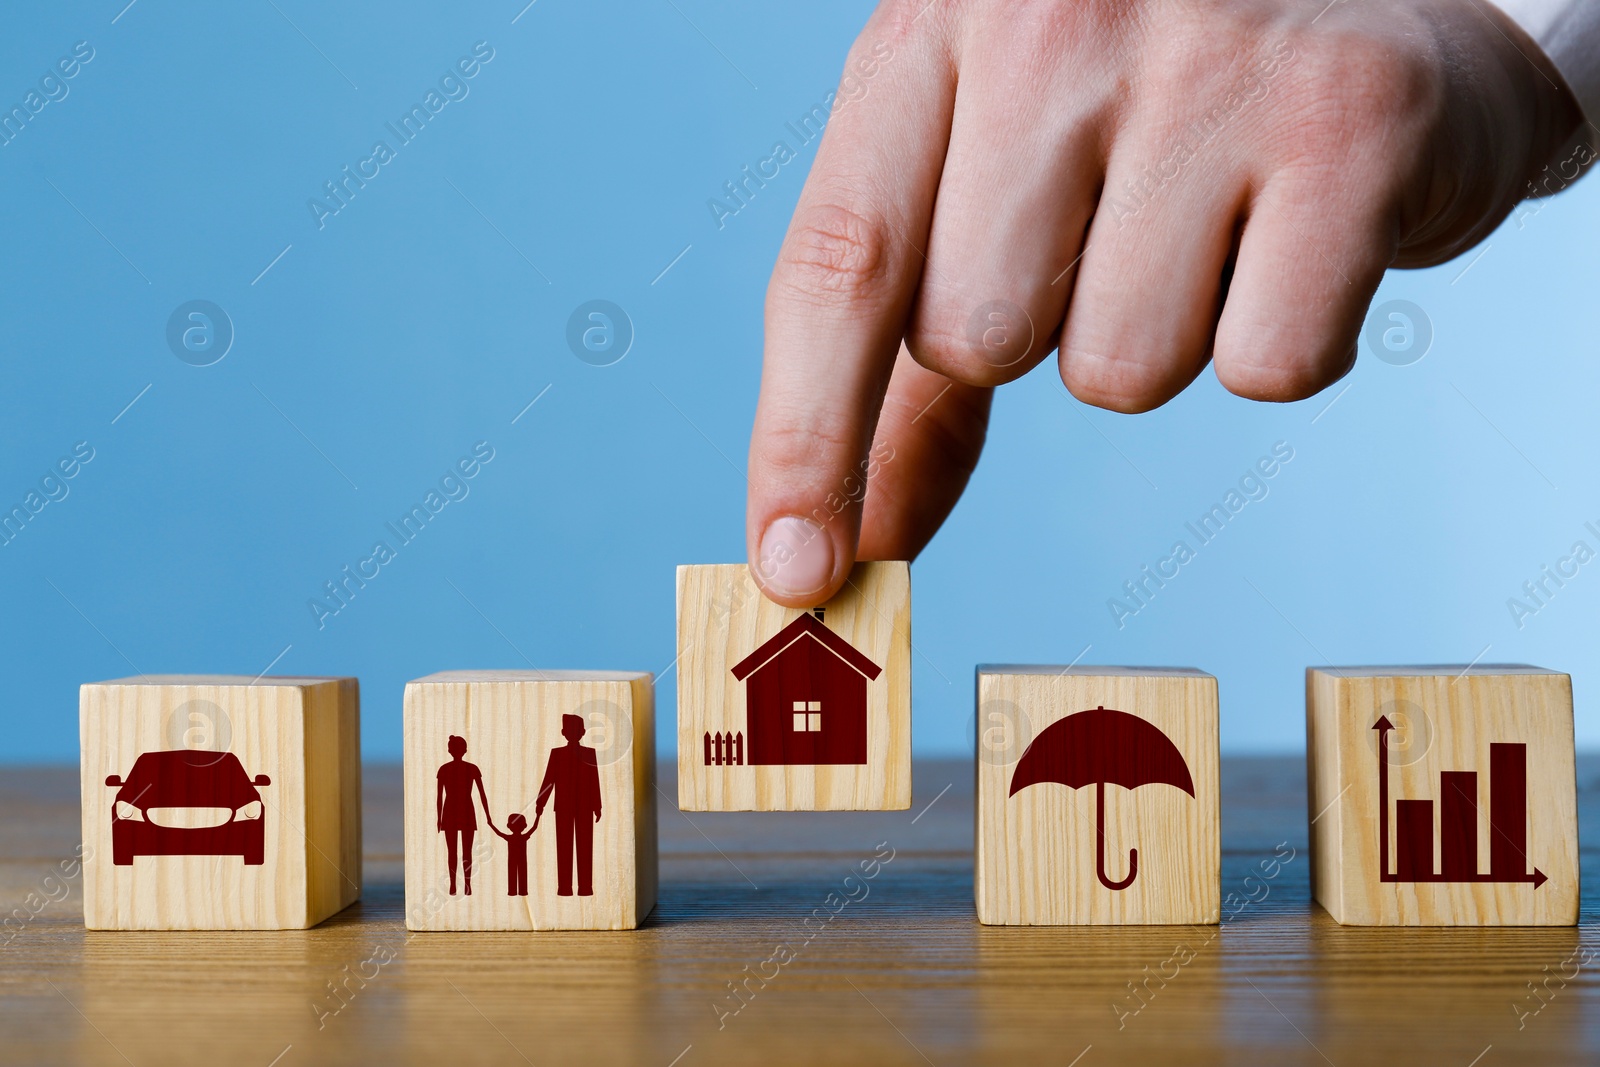 Image of Man arranging cubes with different icons in row on wooden table against light blue background, closeup. Insurance concept